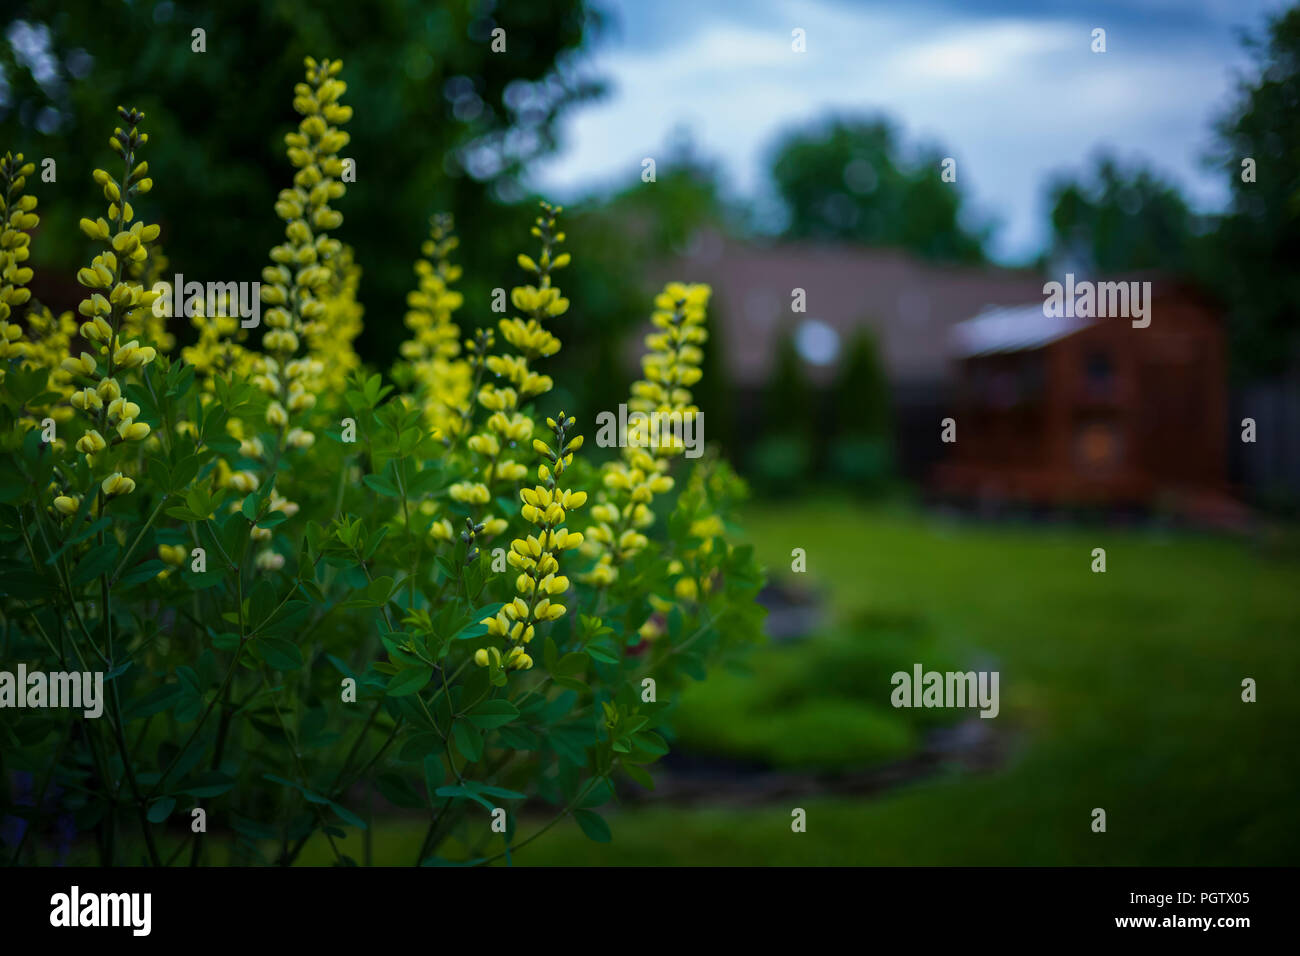 Baptisia blooming in the last spring. Stock Photo